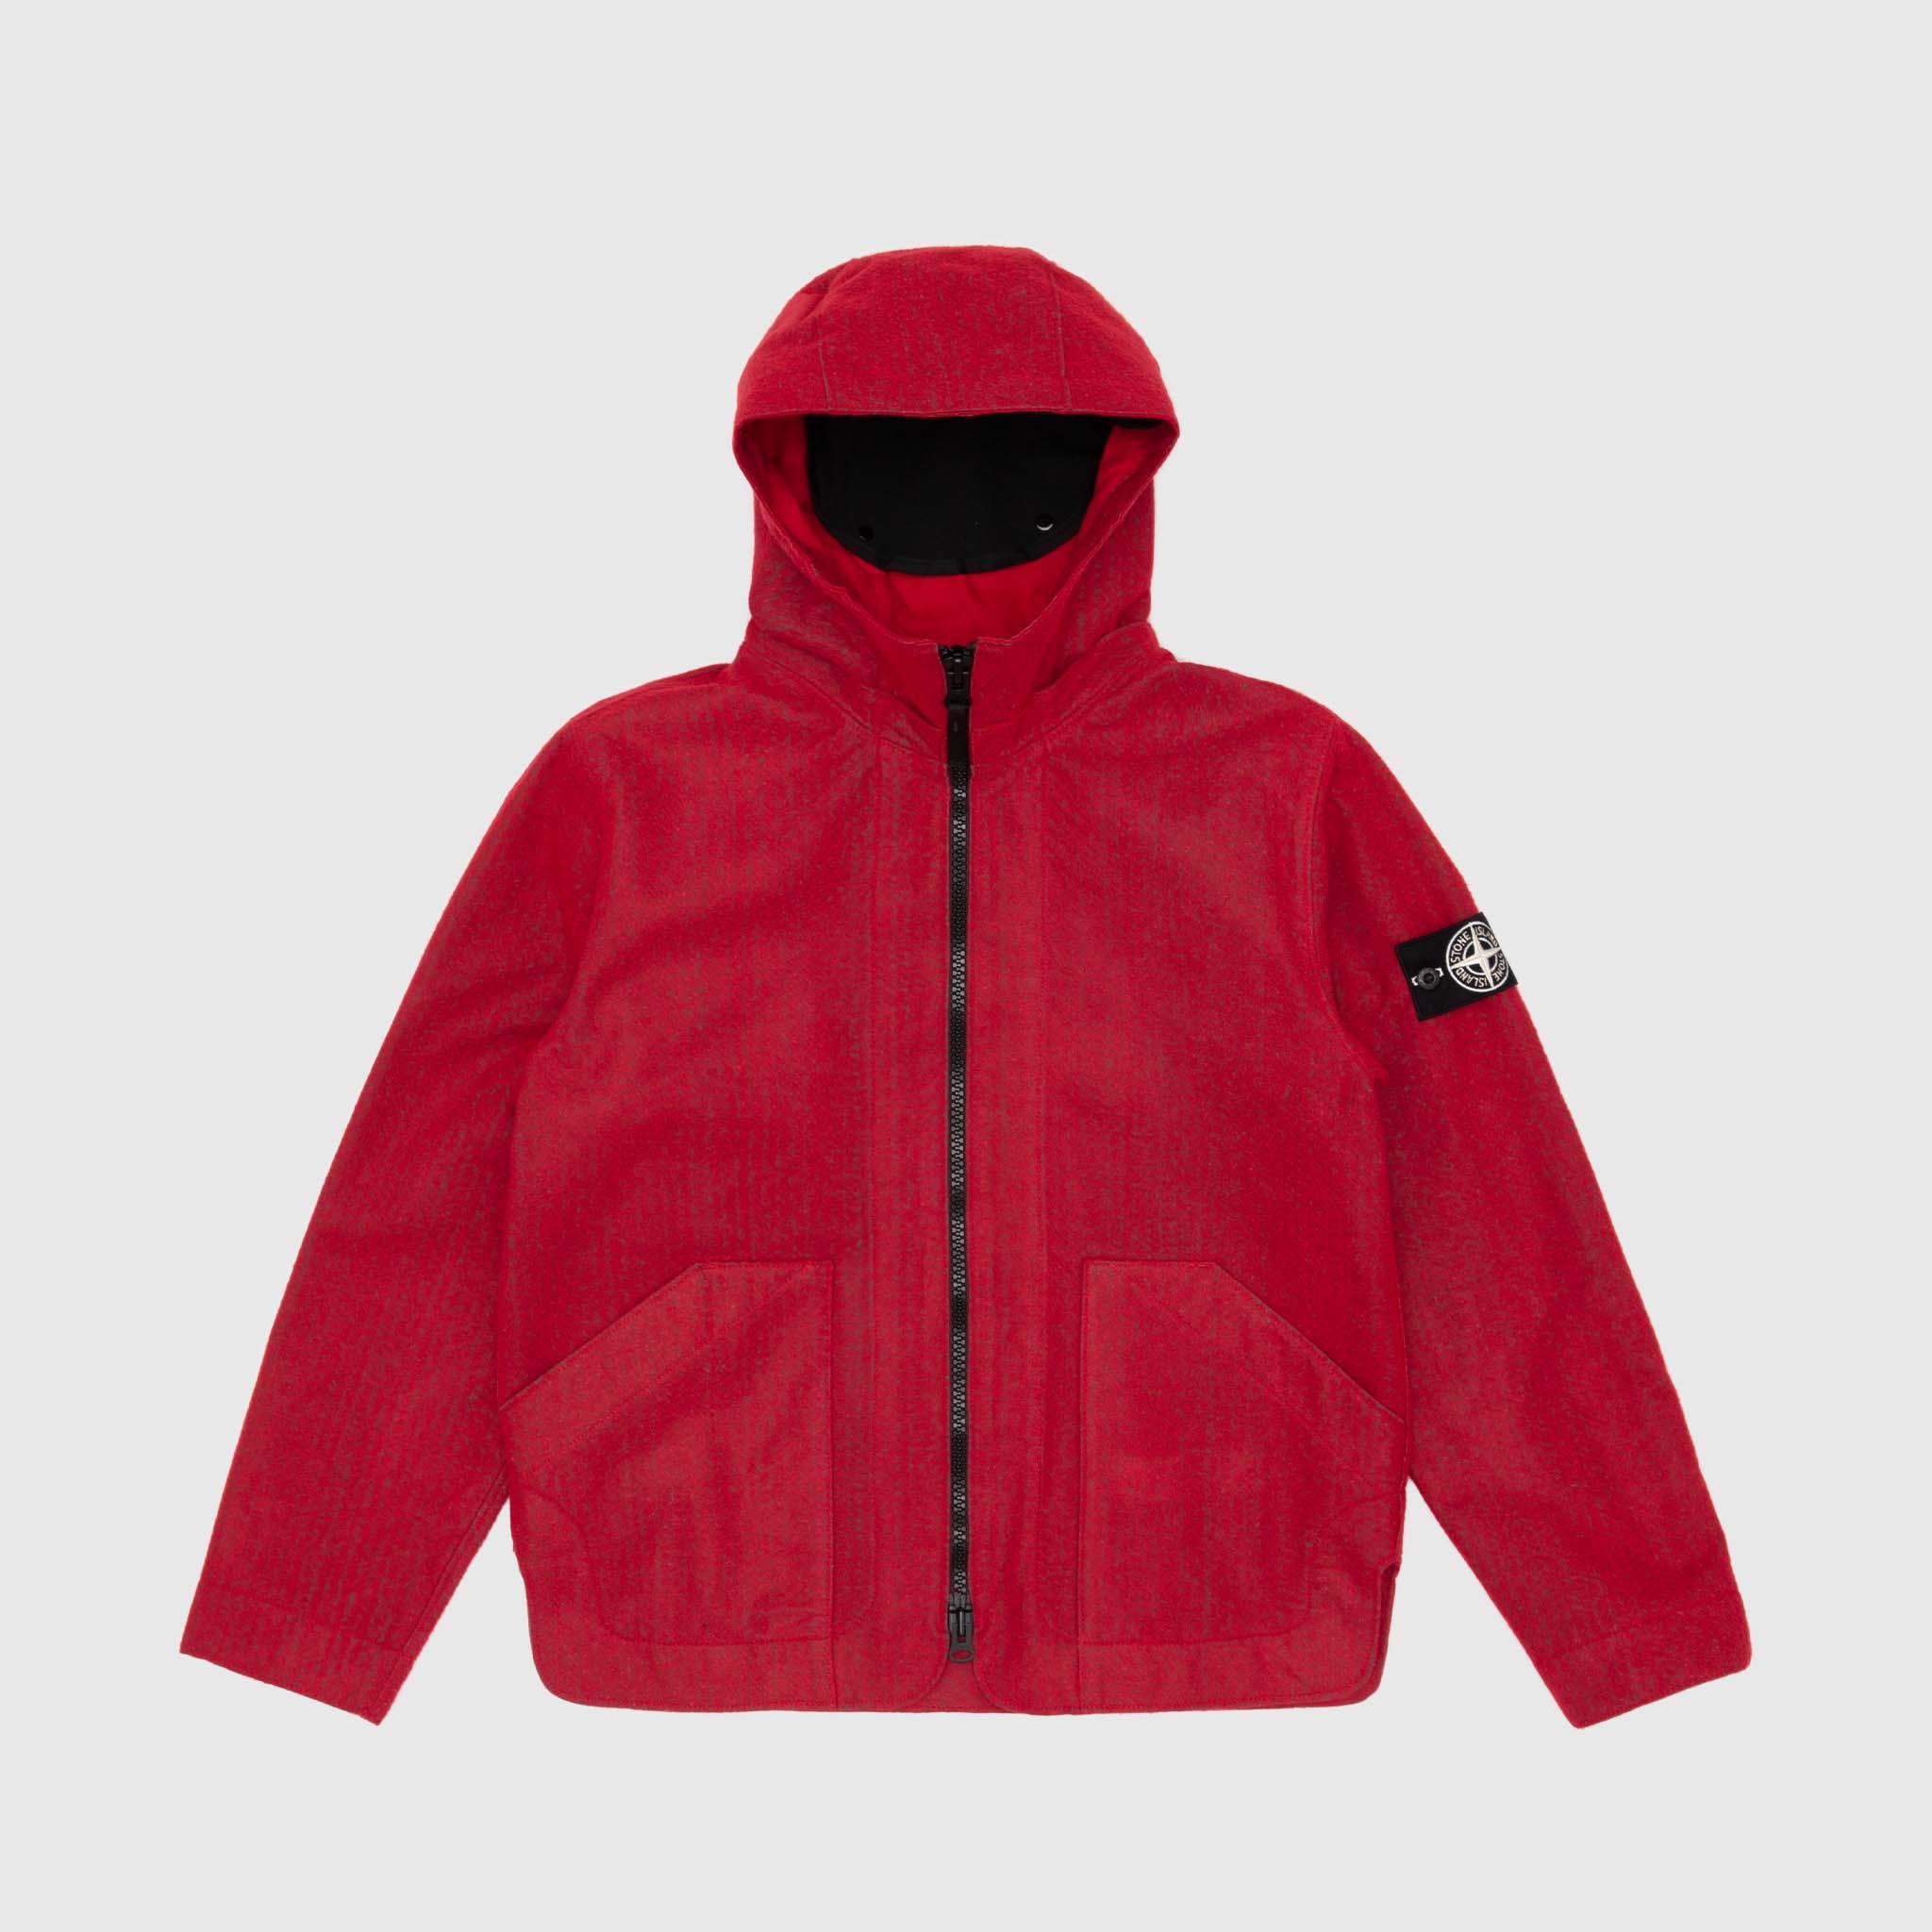 Stone Island Needle Punched Reflective Hooded Jacket in Red for Men | Lyst